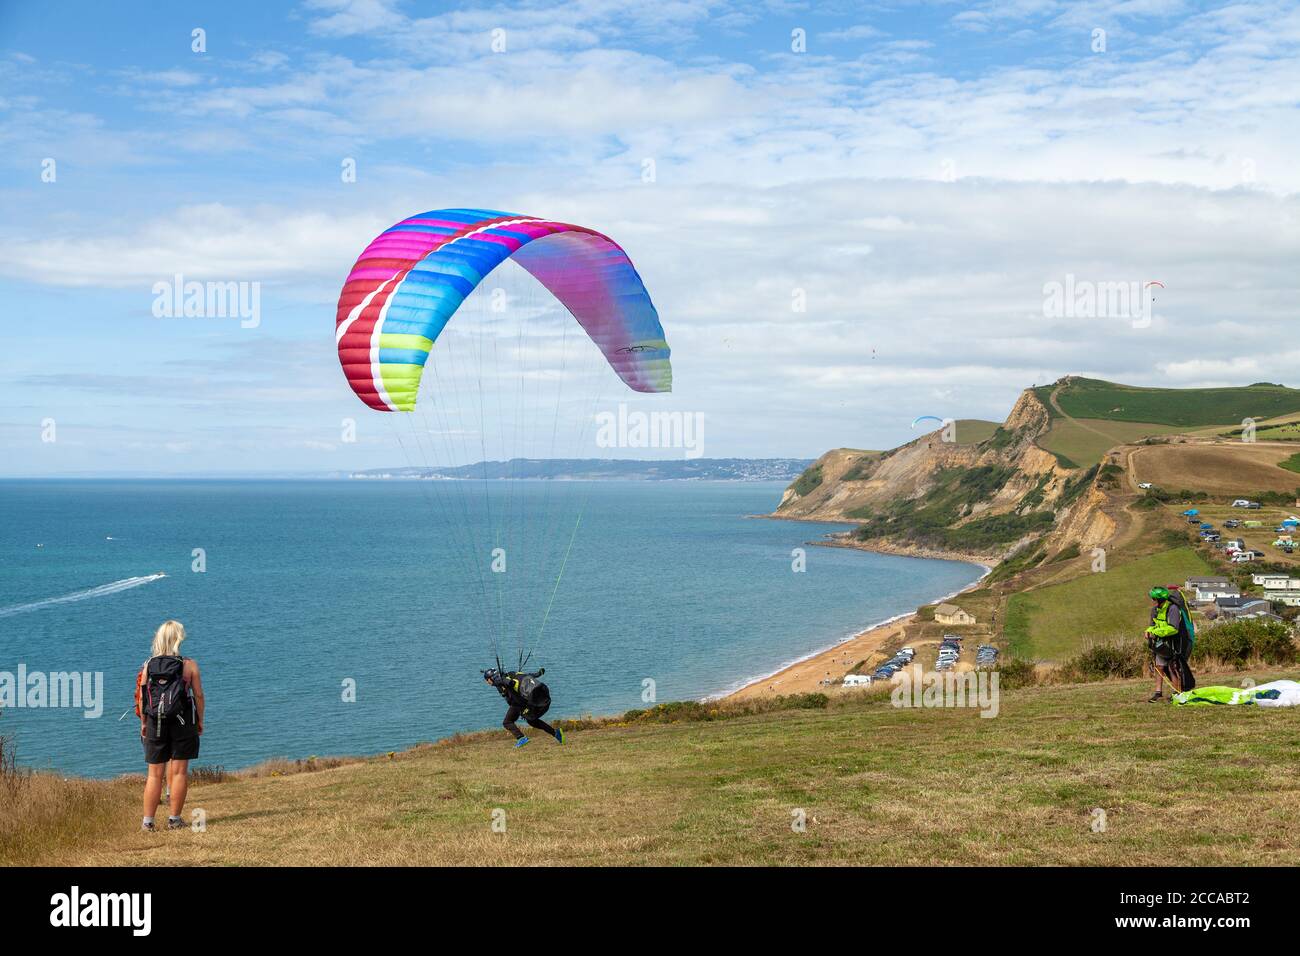 A Paraglider about to take off near Eype mouth beach along the South West Coast Path, on the Jurassic Coast, Dorset, England, UK Stock Photo